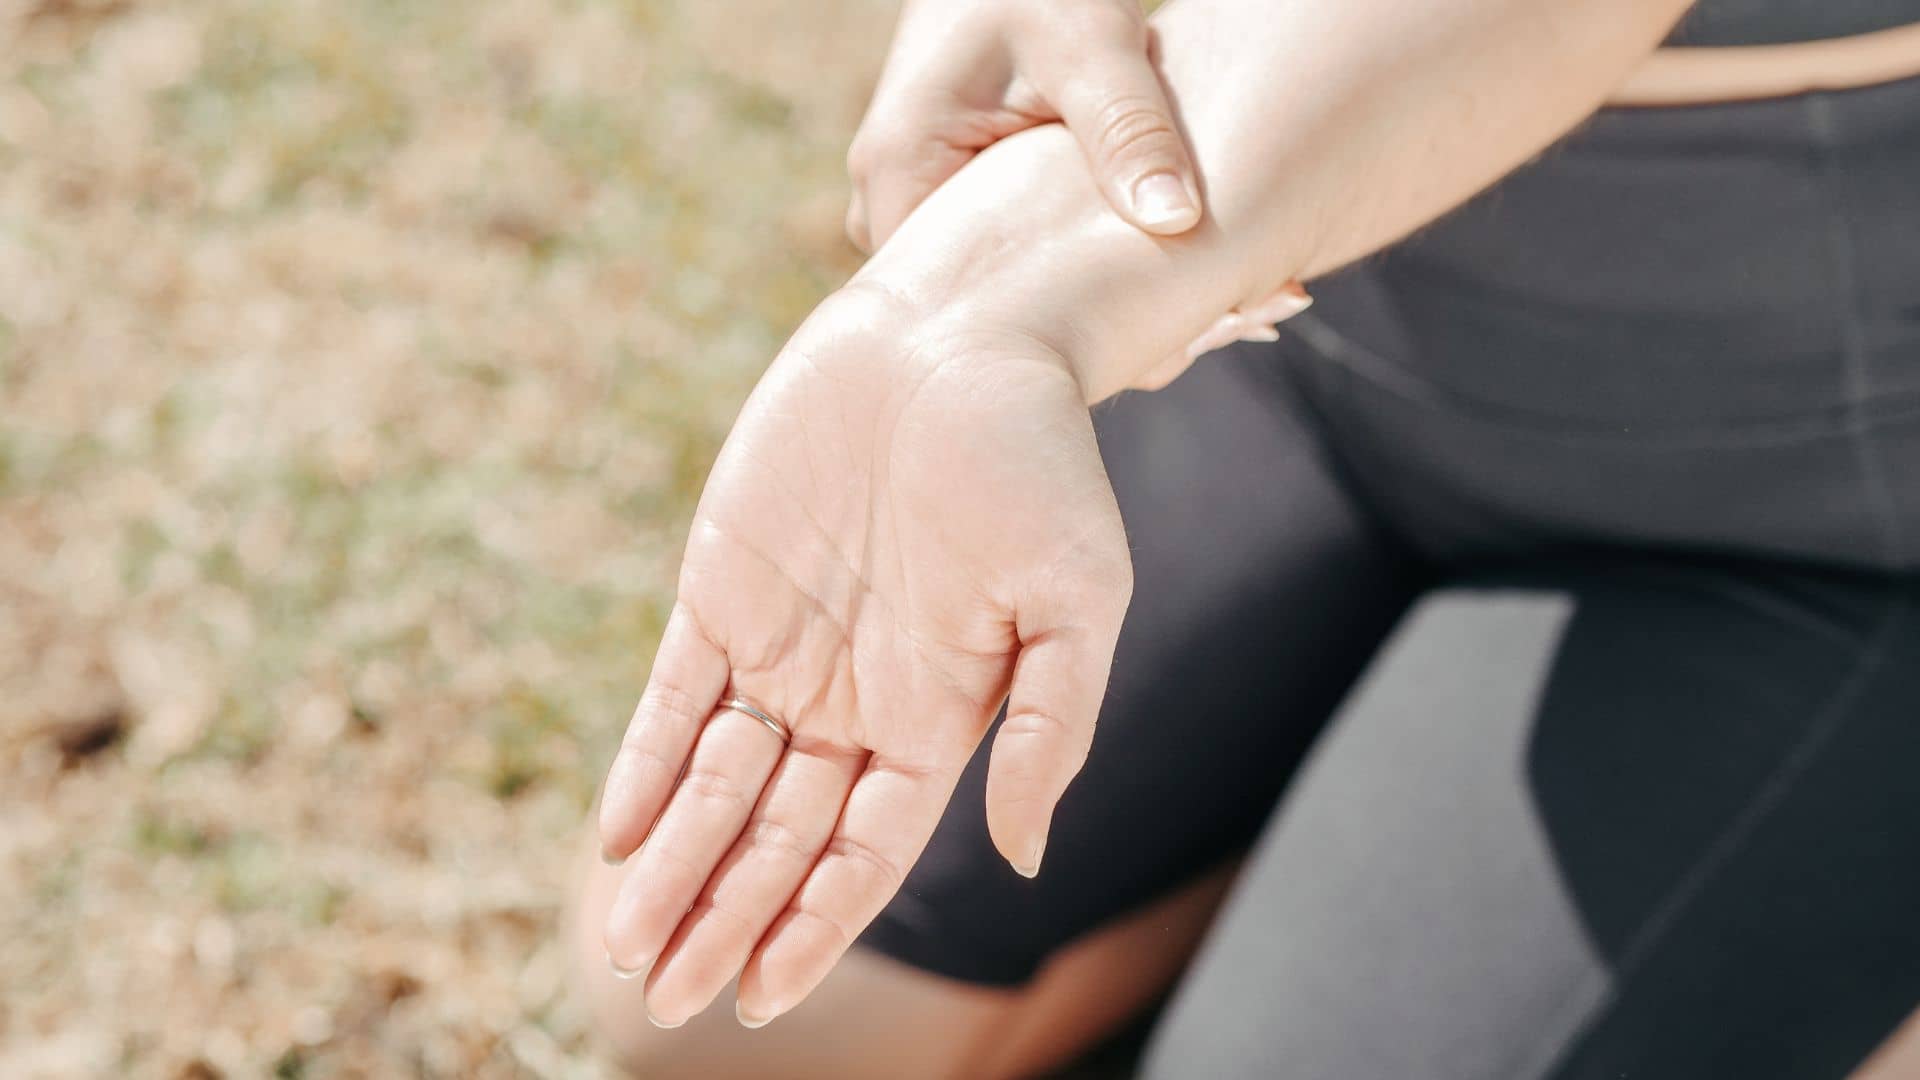 Why You Feel pushups So Much on your wrists (Explained)